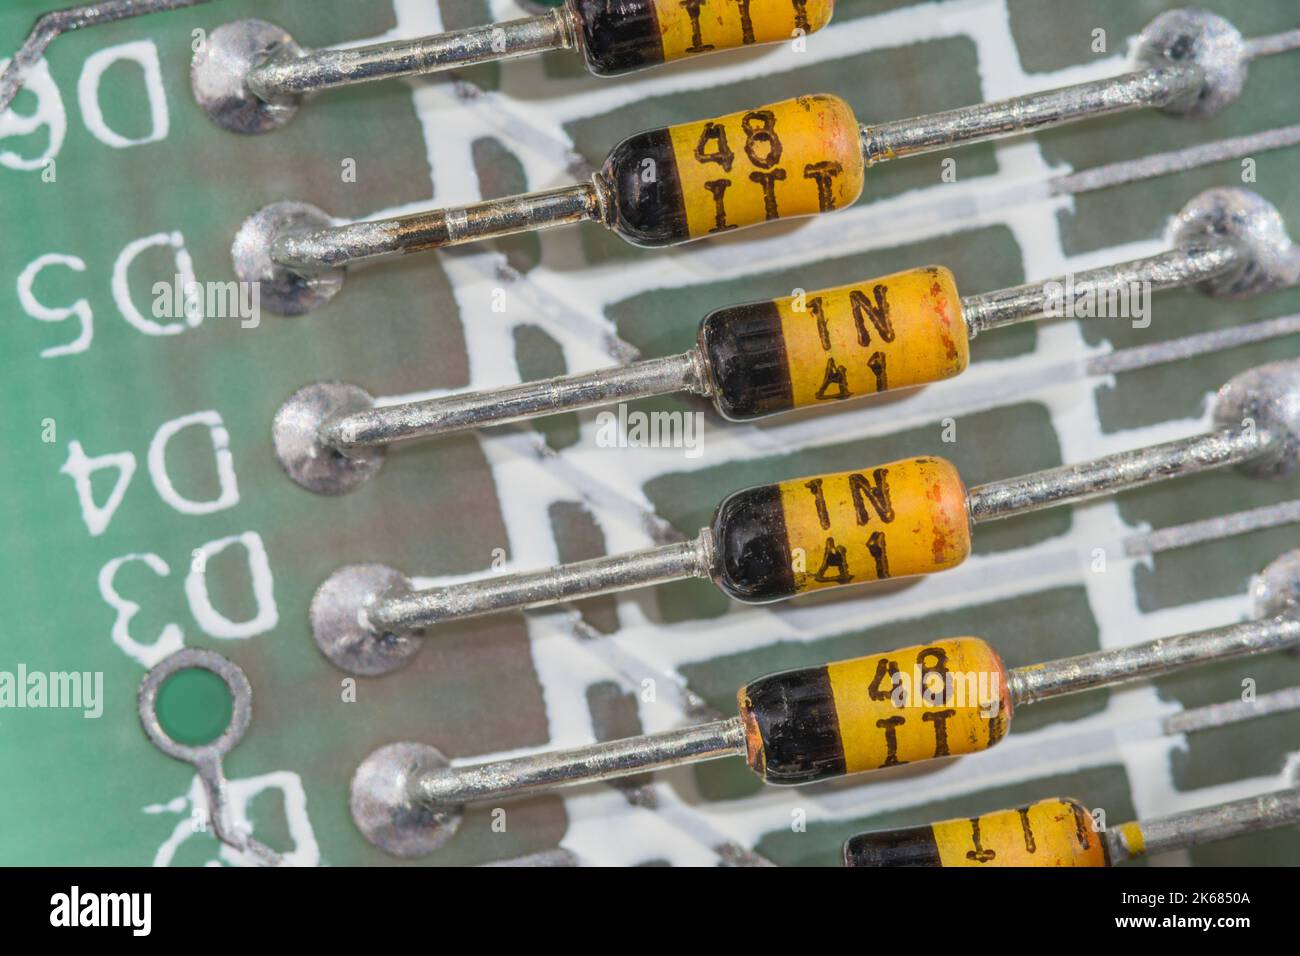 Row of diodes on Series 2, 16k, Sinclair ZX Spectrum home computer. Looks as if these are possibly yellow glass Zener diodes but unable to verify. Stock Photo